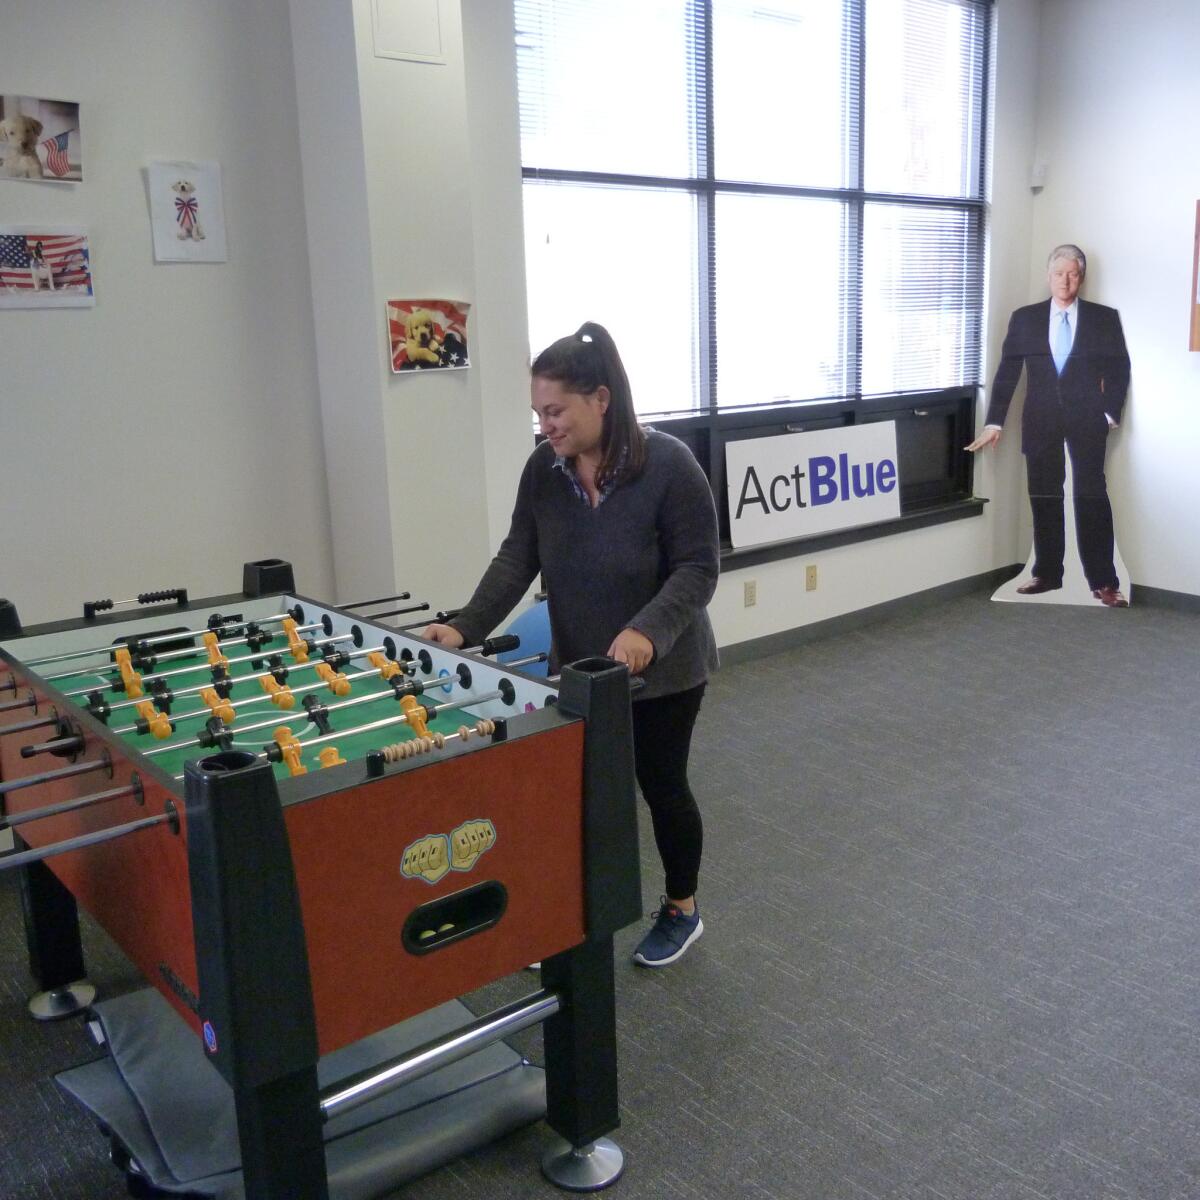 Marketing manager Hannah Brown hits the foosballl table in the game room at ActBlue's Somerville, Mass., headquarters. Behind her is a cardboard cutout of Bill Clinton.